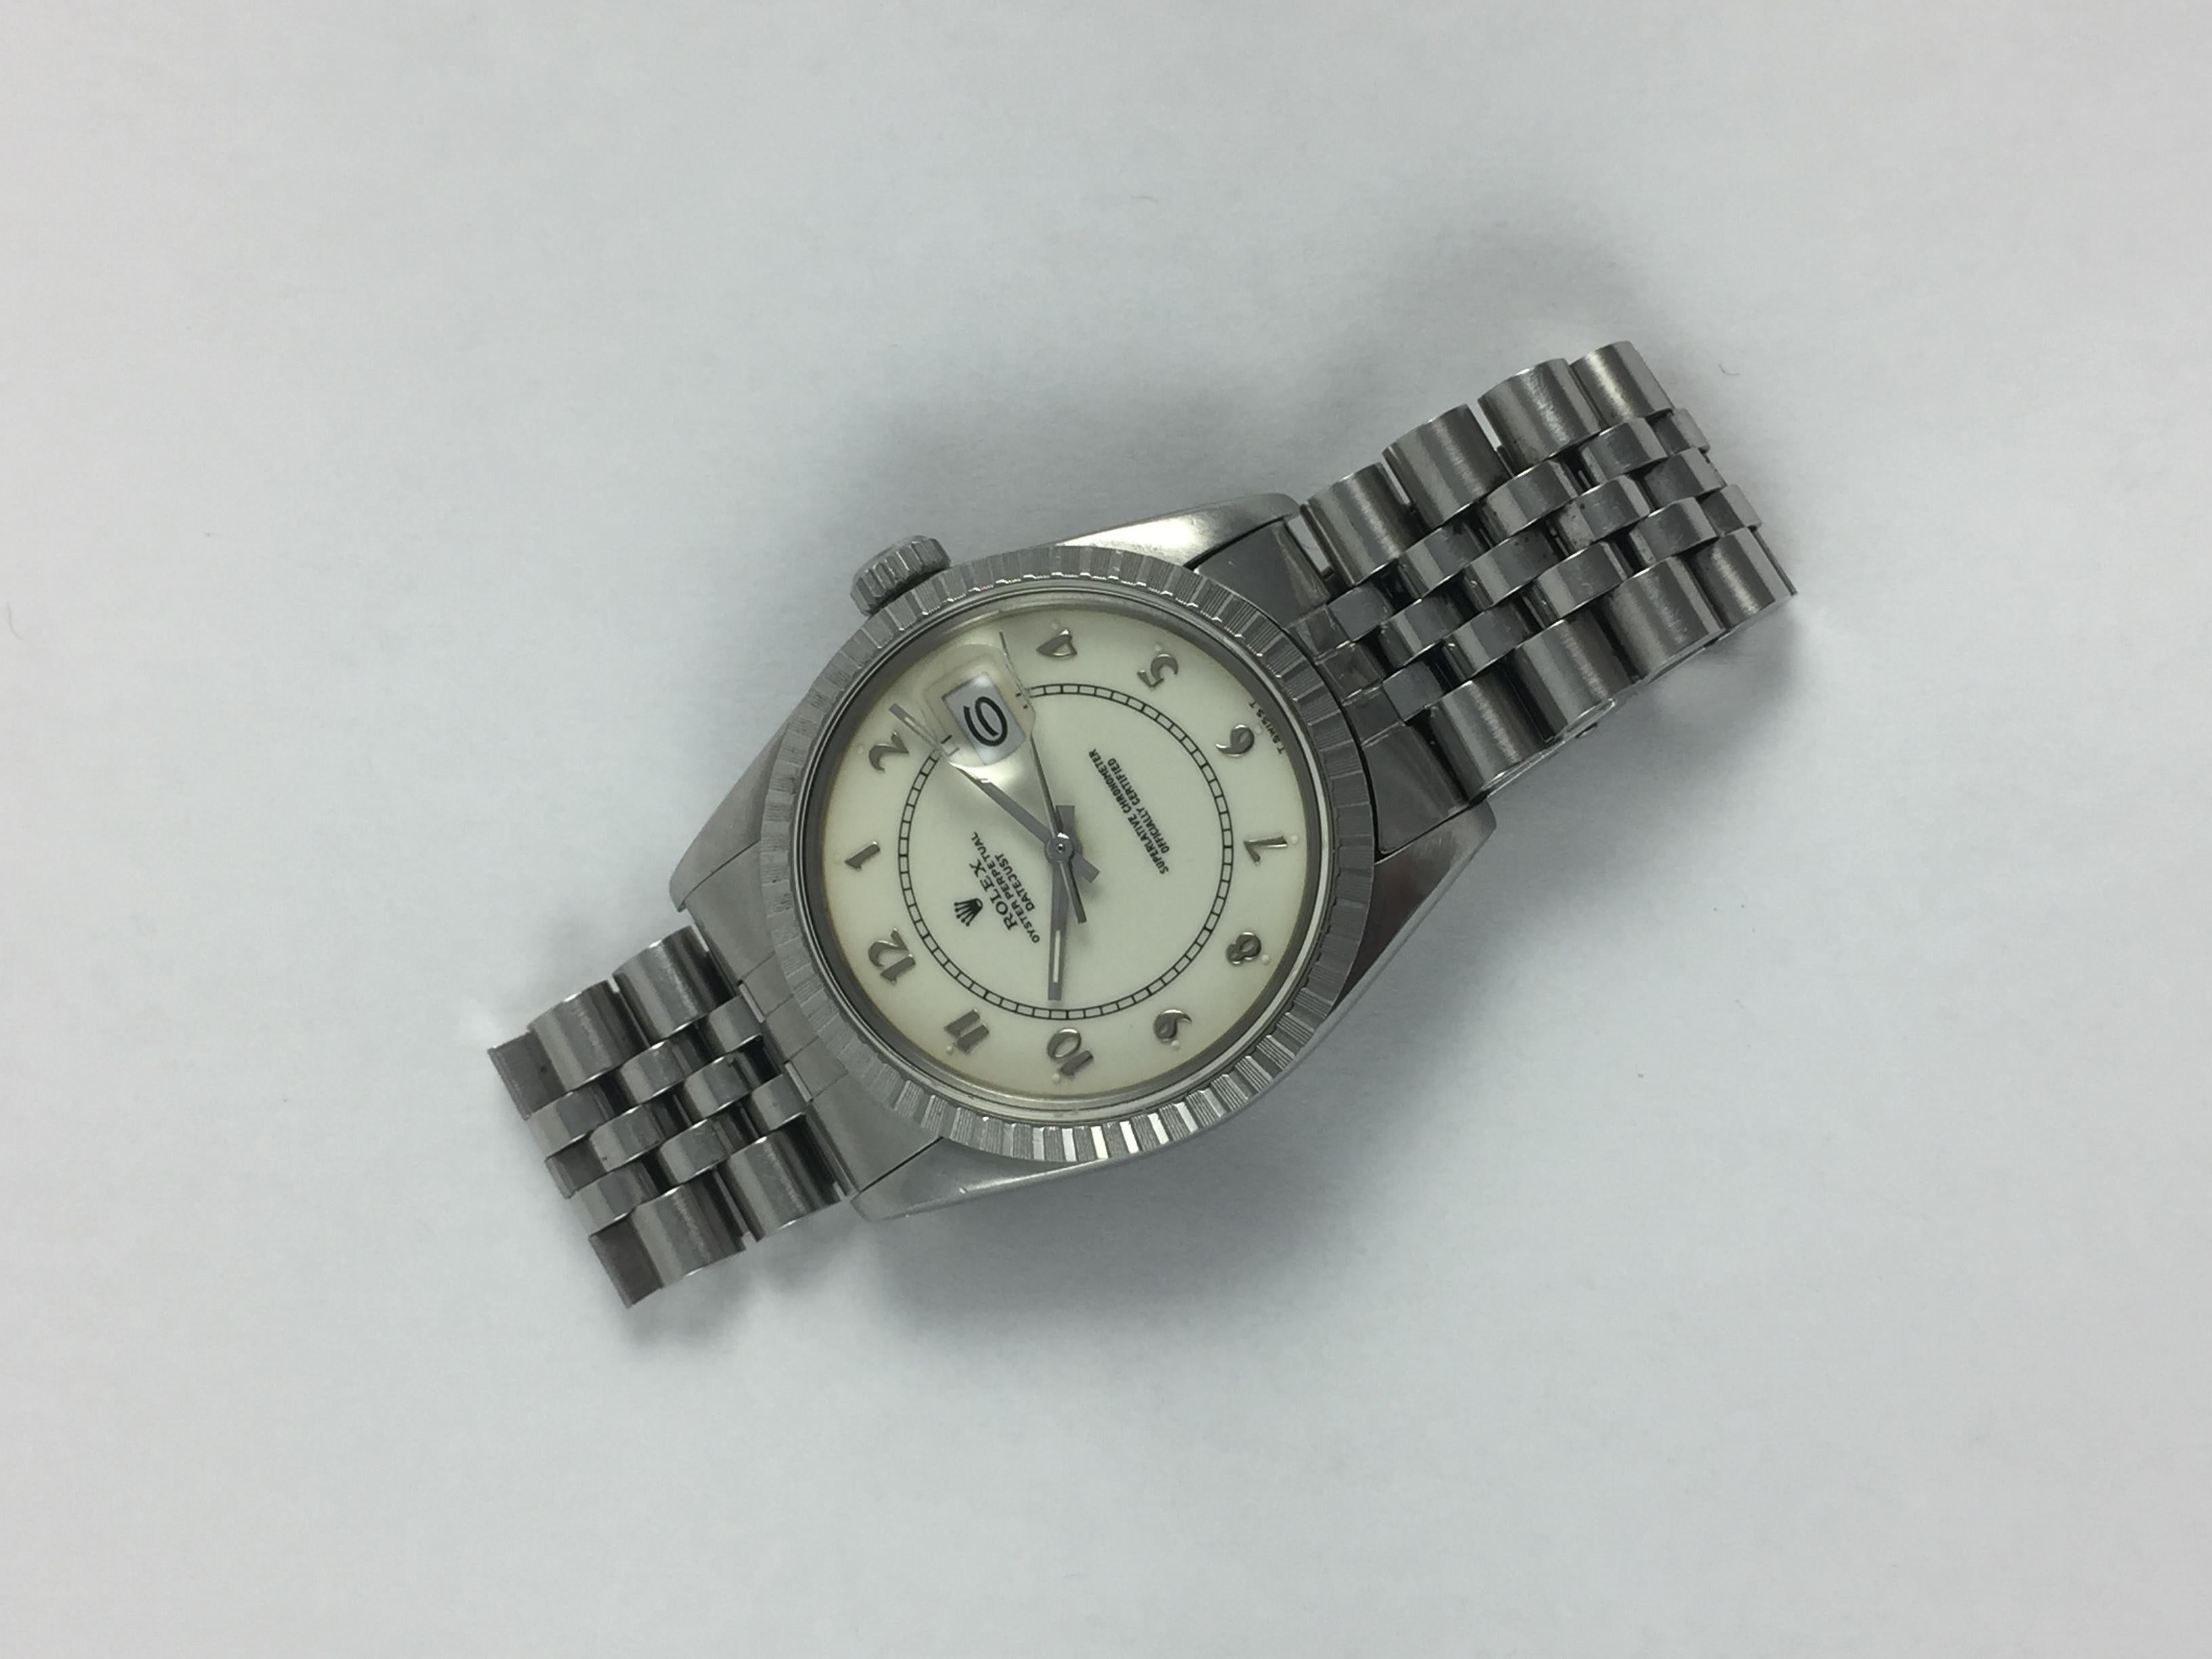 Rolex Steel and White Gold Boiler Gauge Datejust Watch with Papers, 1980s For Sale 1